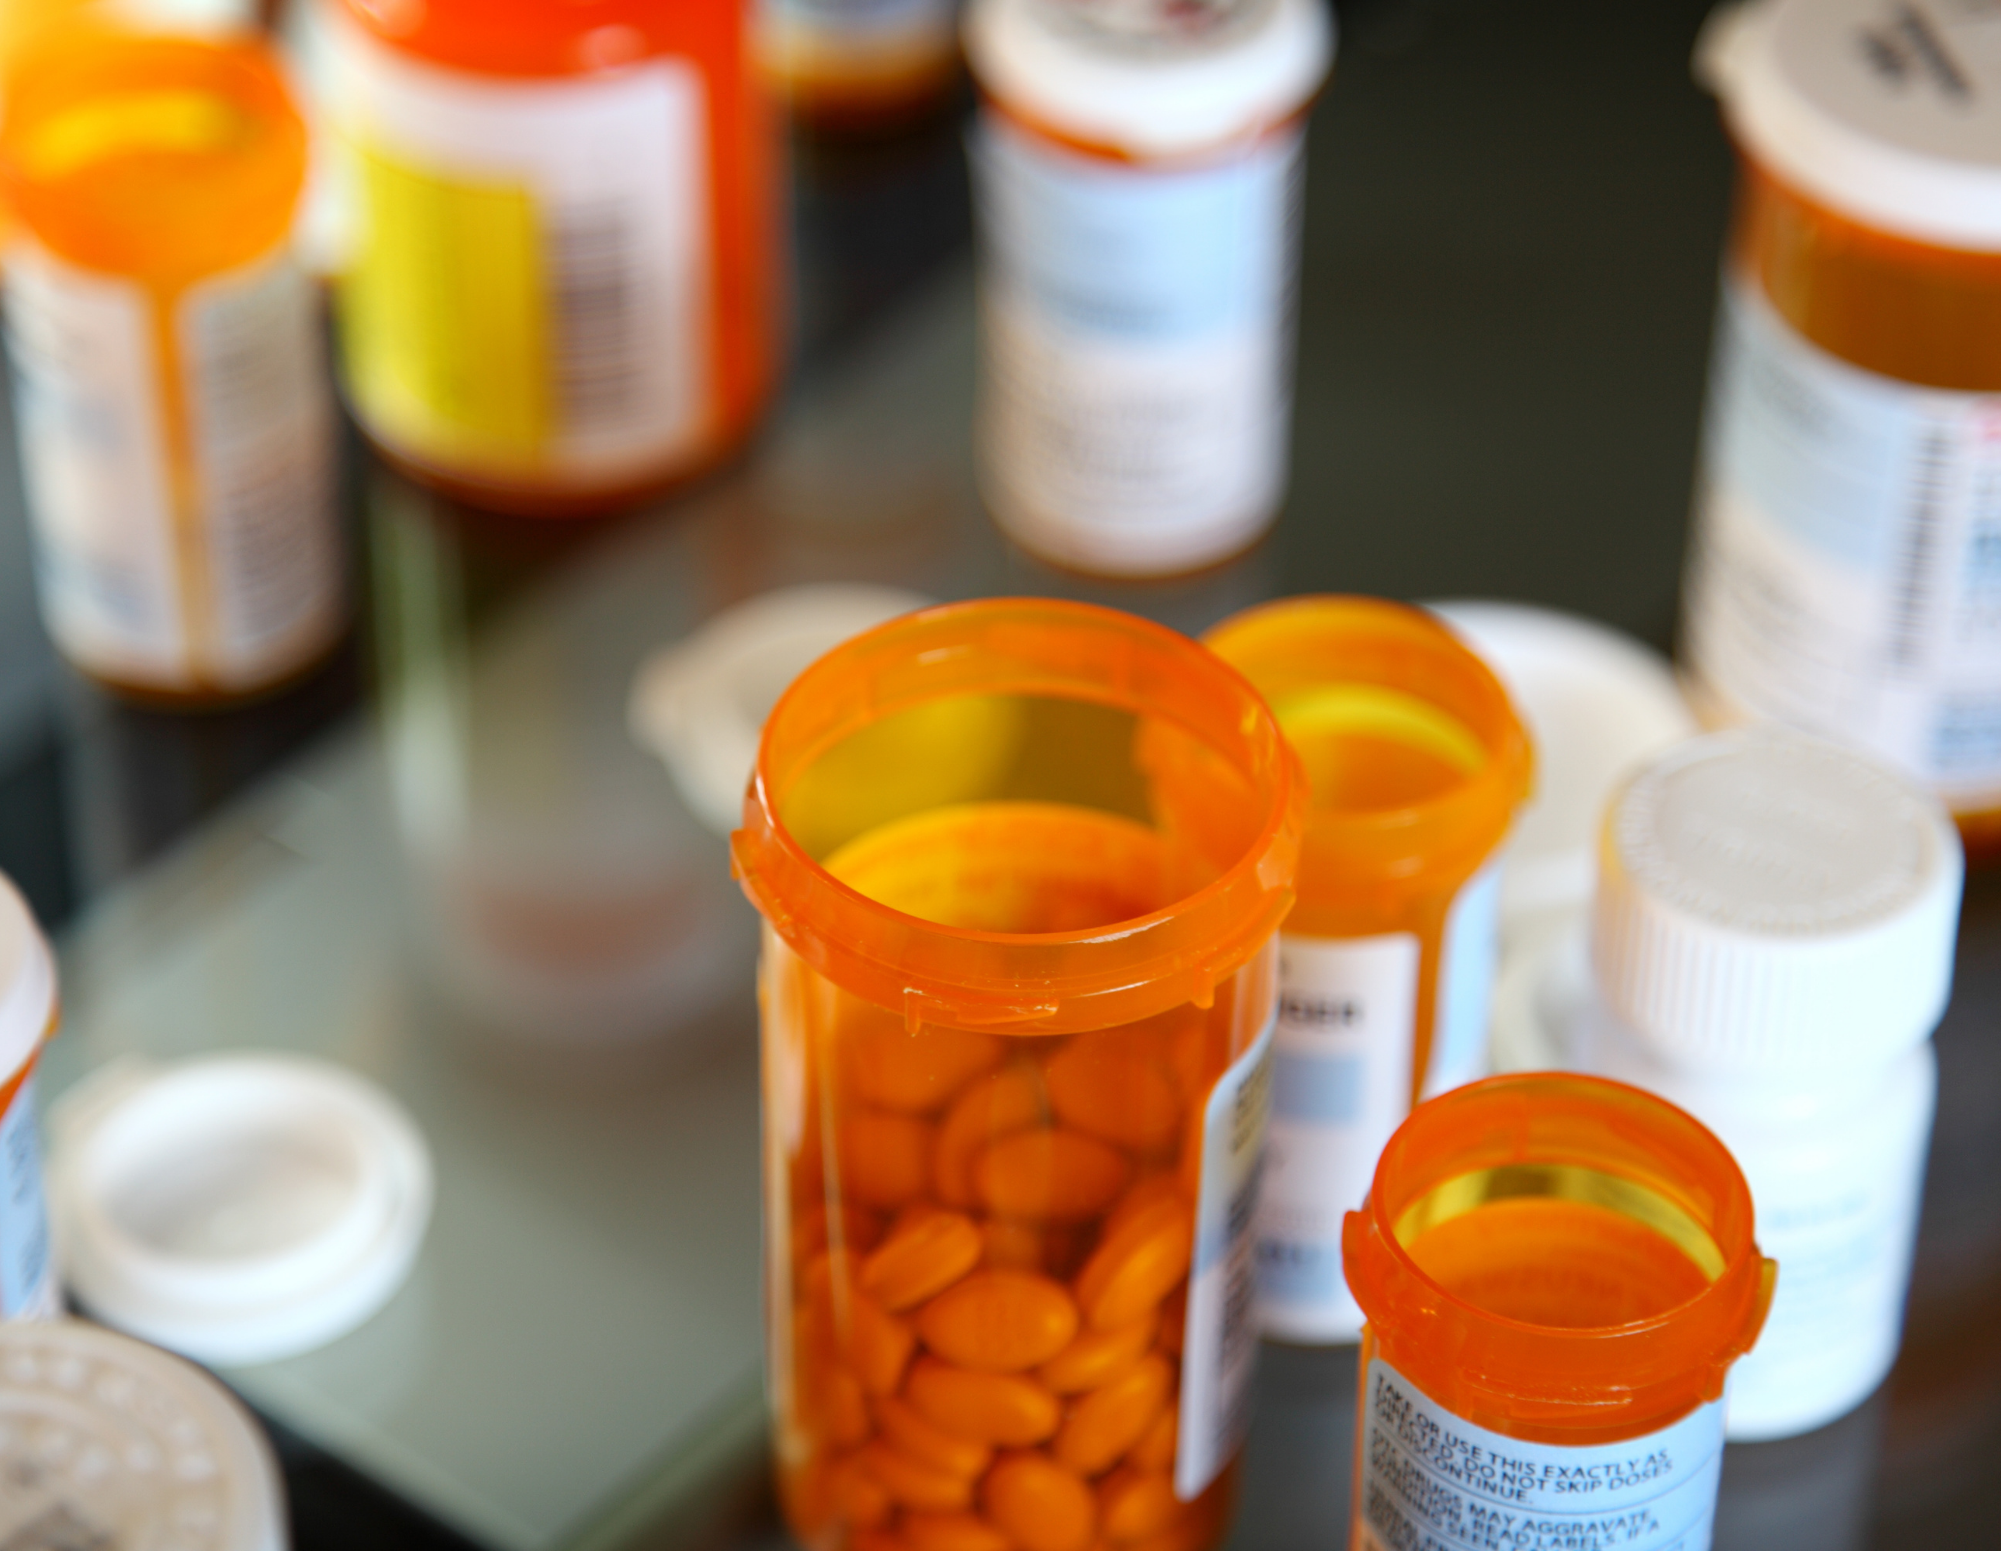 In comments to federal agency, PhRMA warns of the growing influence of middlemen over patient access and out-of-pocket costs for prescription medicines